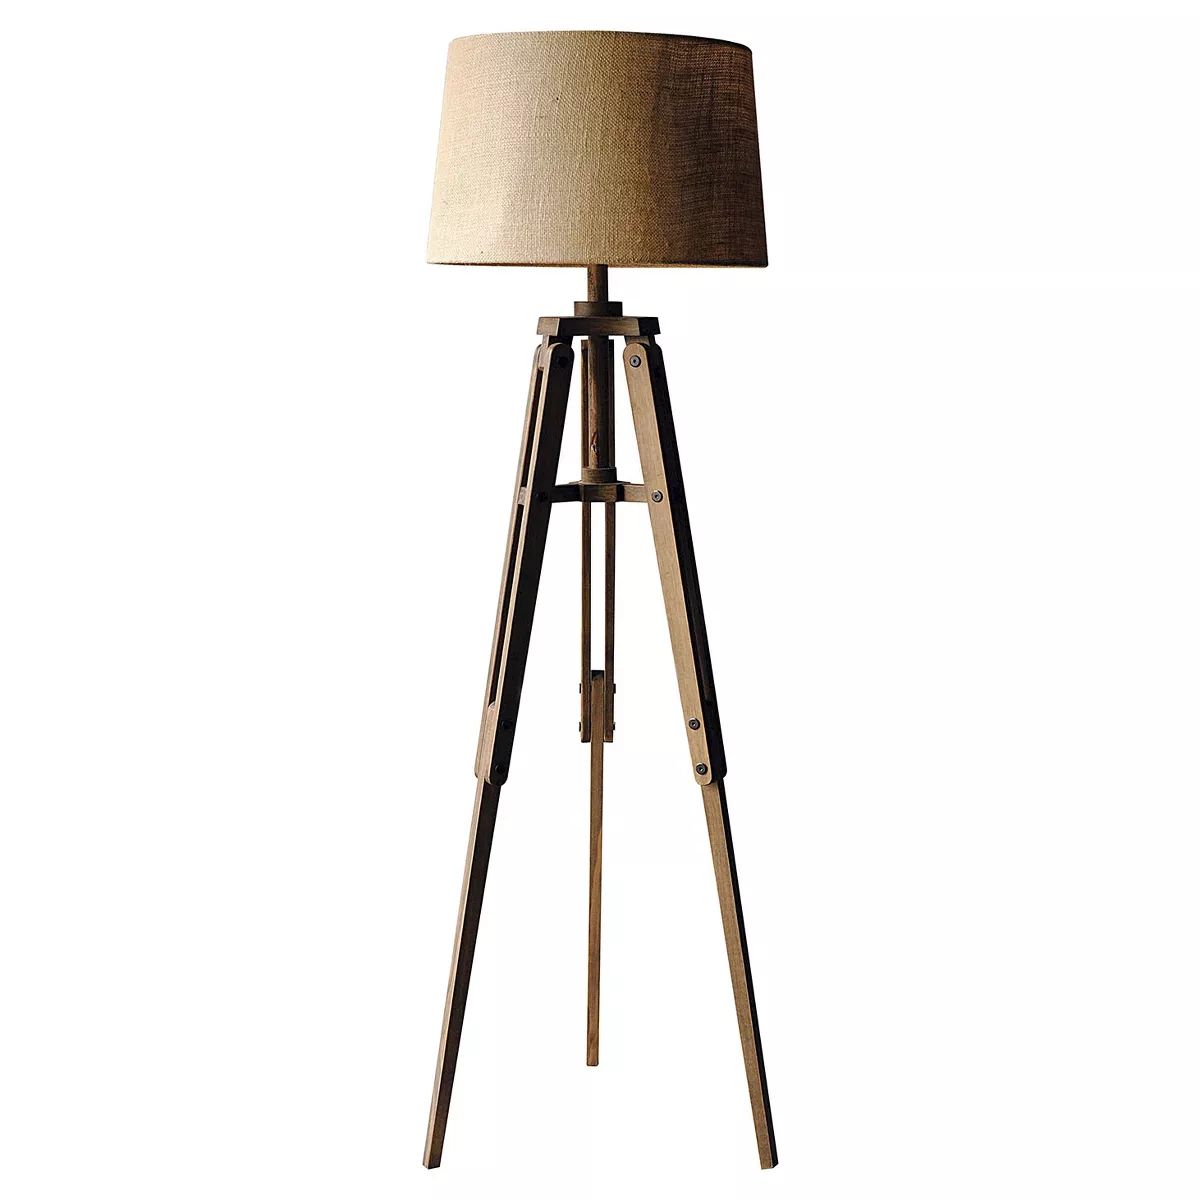 Mariner Tripod Style Wood Floor Lamp with Burlap Drum Shade Rust - Storied Home | Target